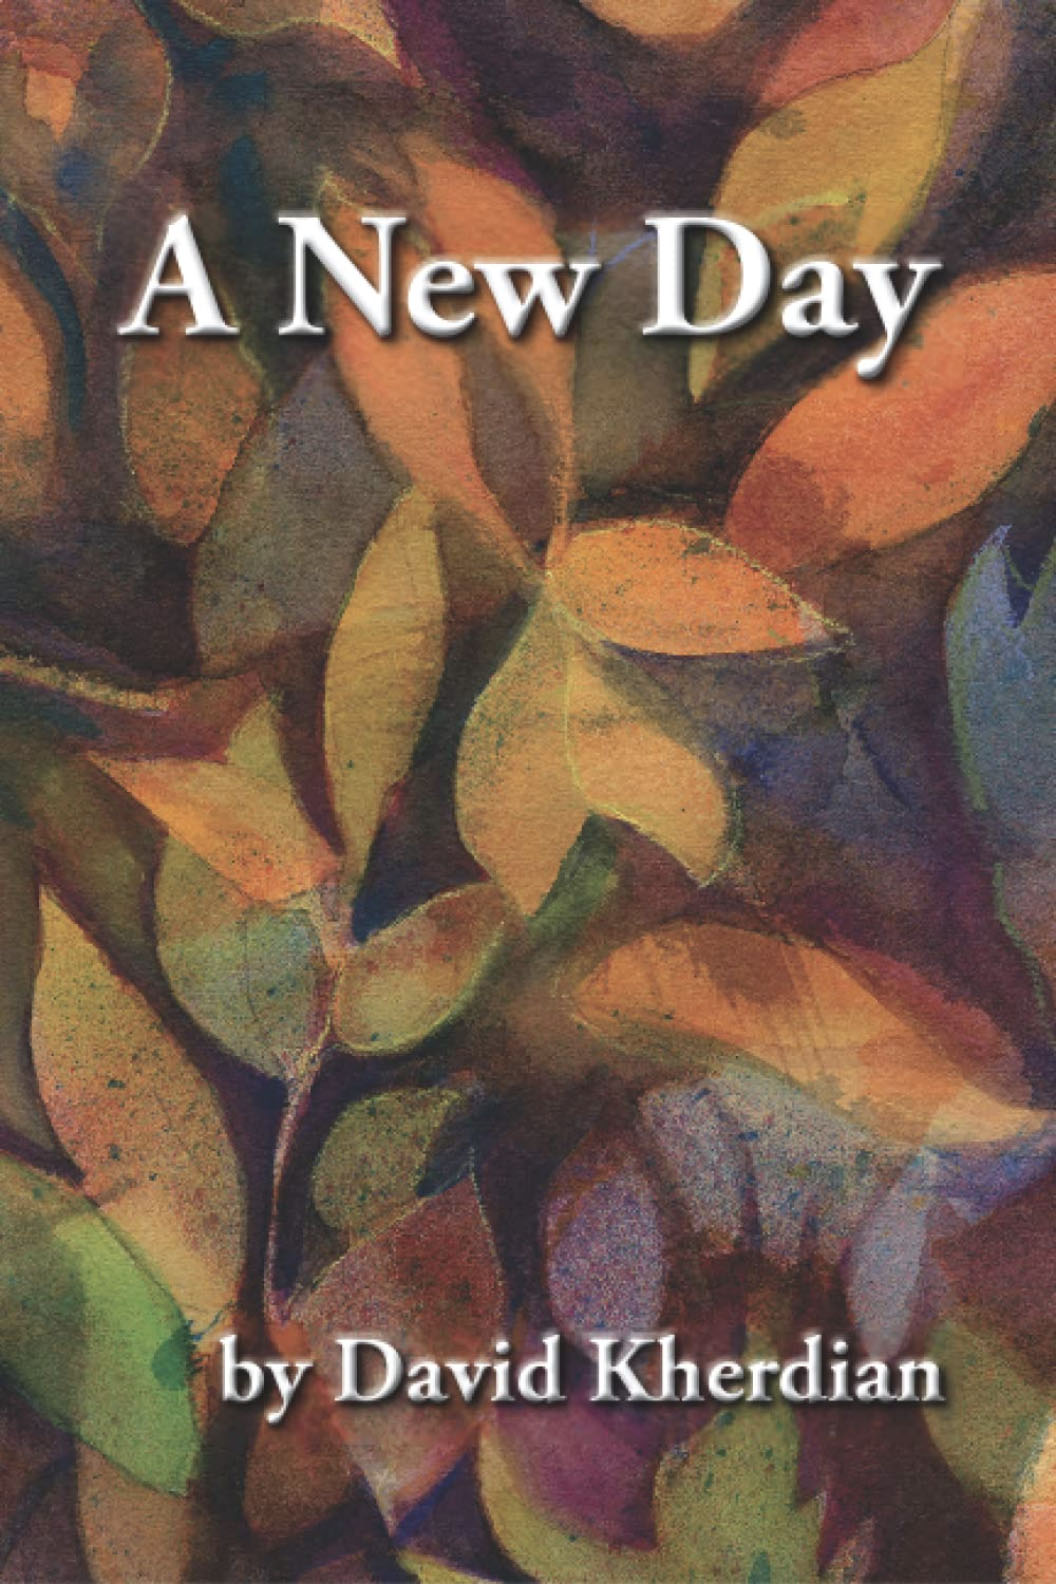 A New Day - A book of original poetry by David Kherdian